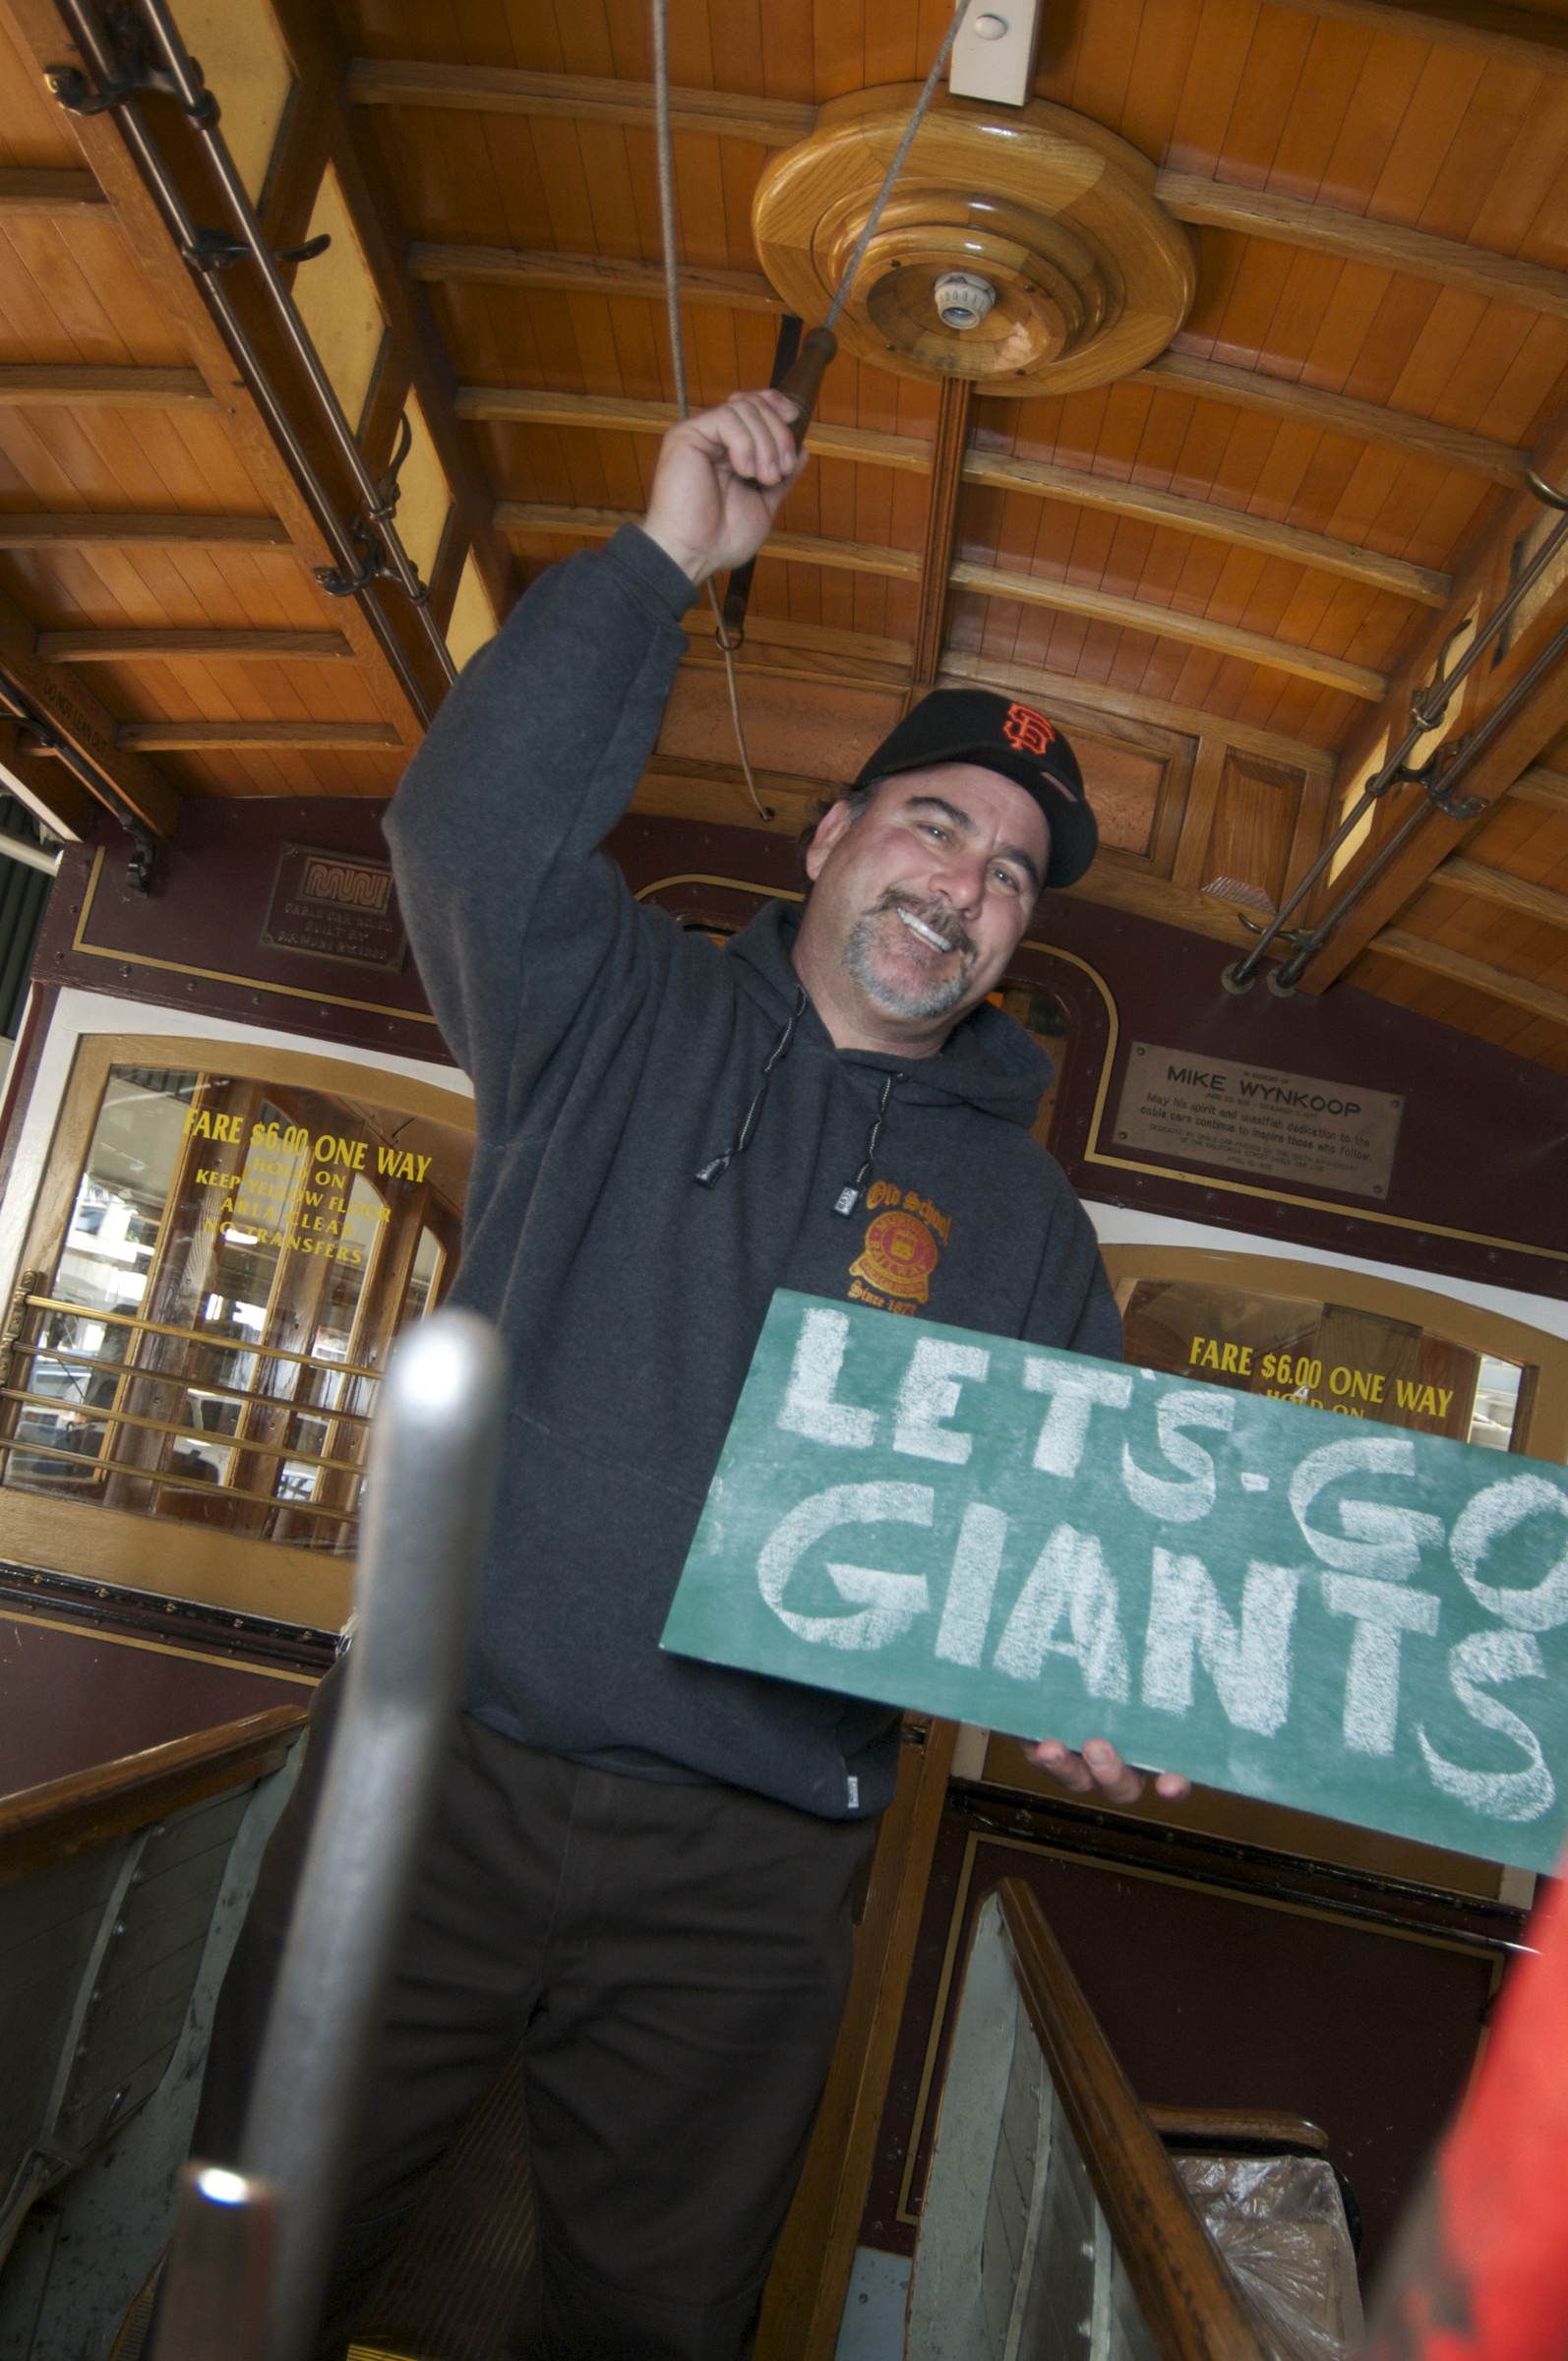 Cable car gripman Ken Lunardi holds a chalkboard sign, "Go Giants," while standing in the middle of a cable car.